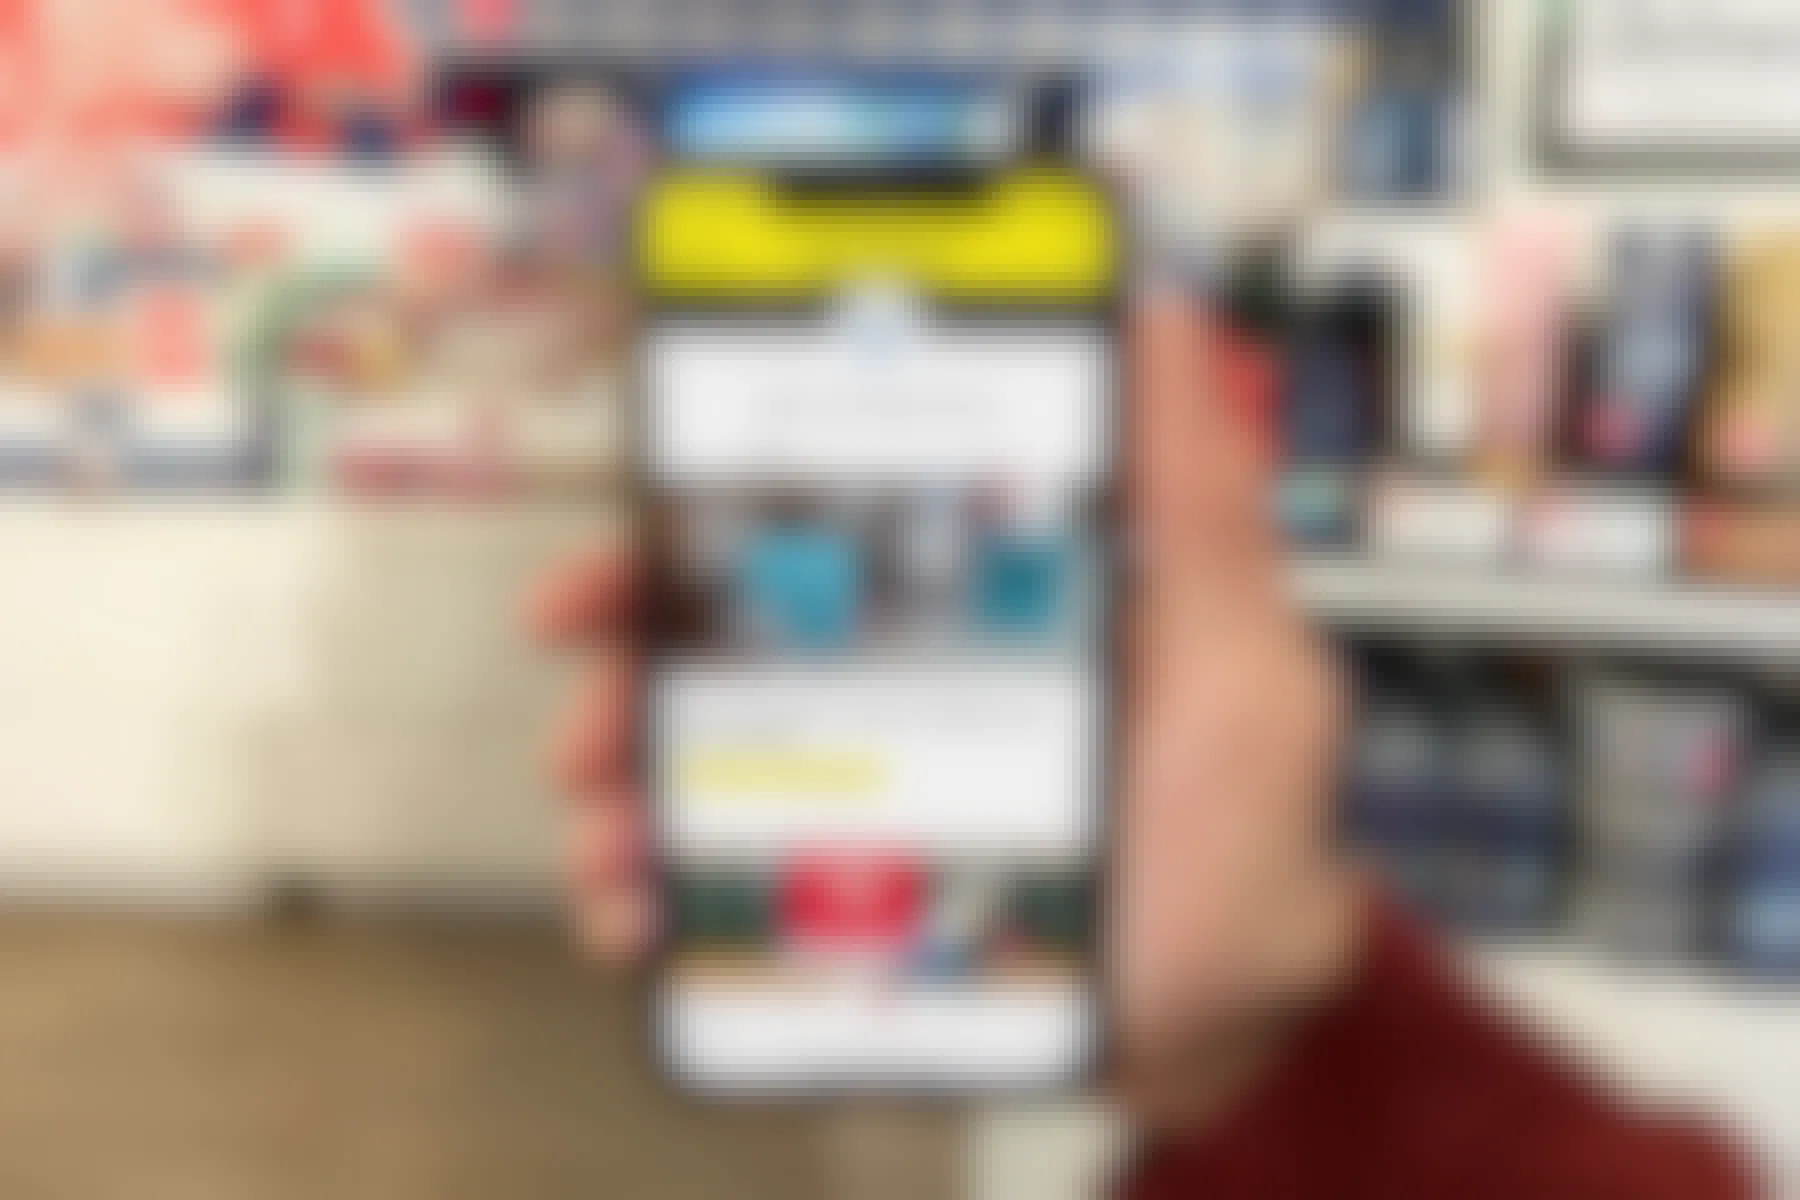 A hand holds a smartphone with the Krazy Coupon Lady app open, showing Bath and Body Works coupons on the screen